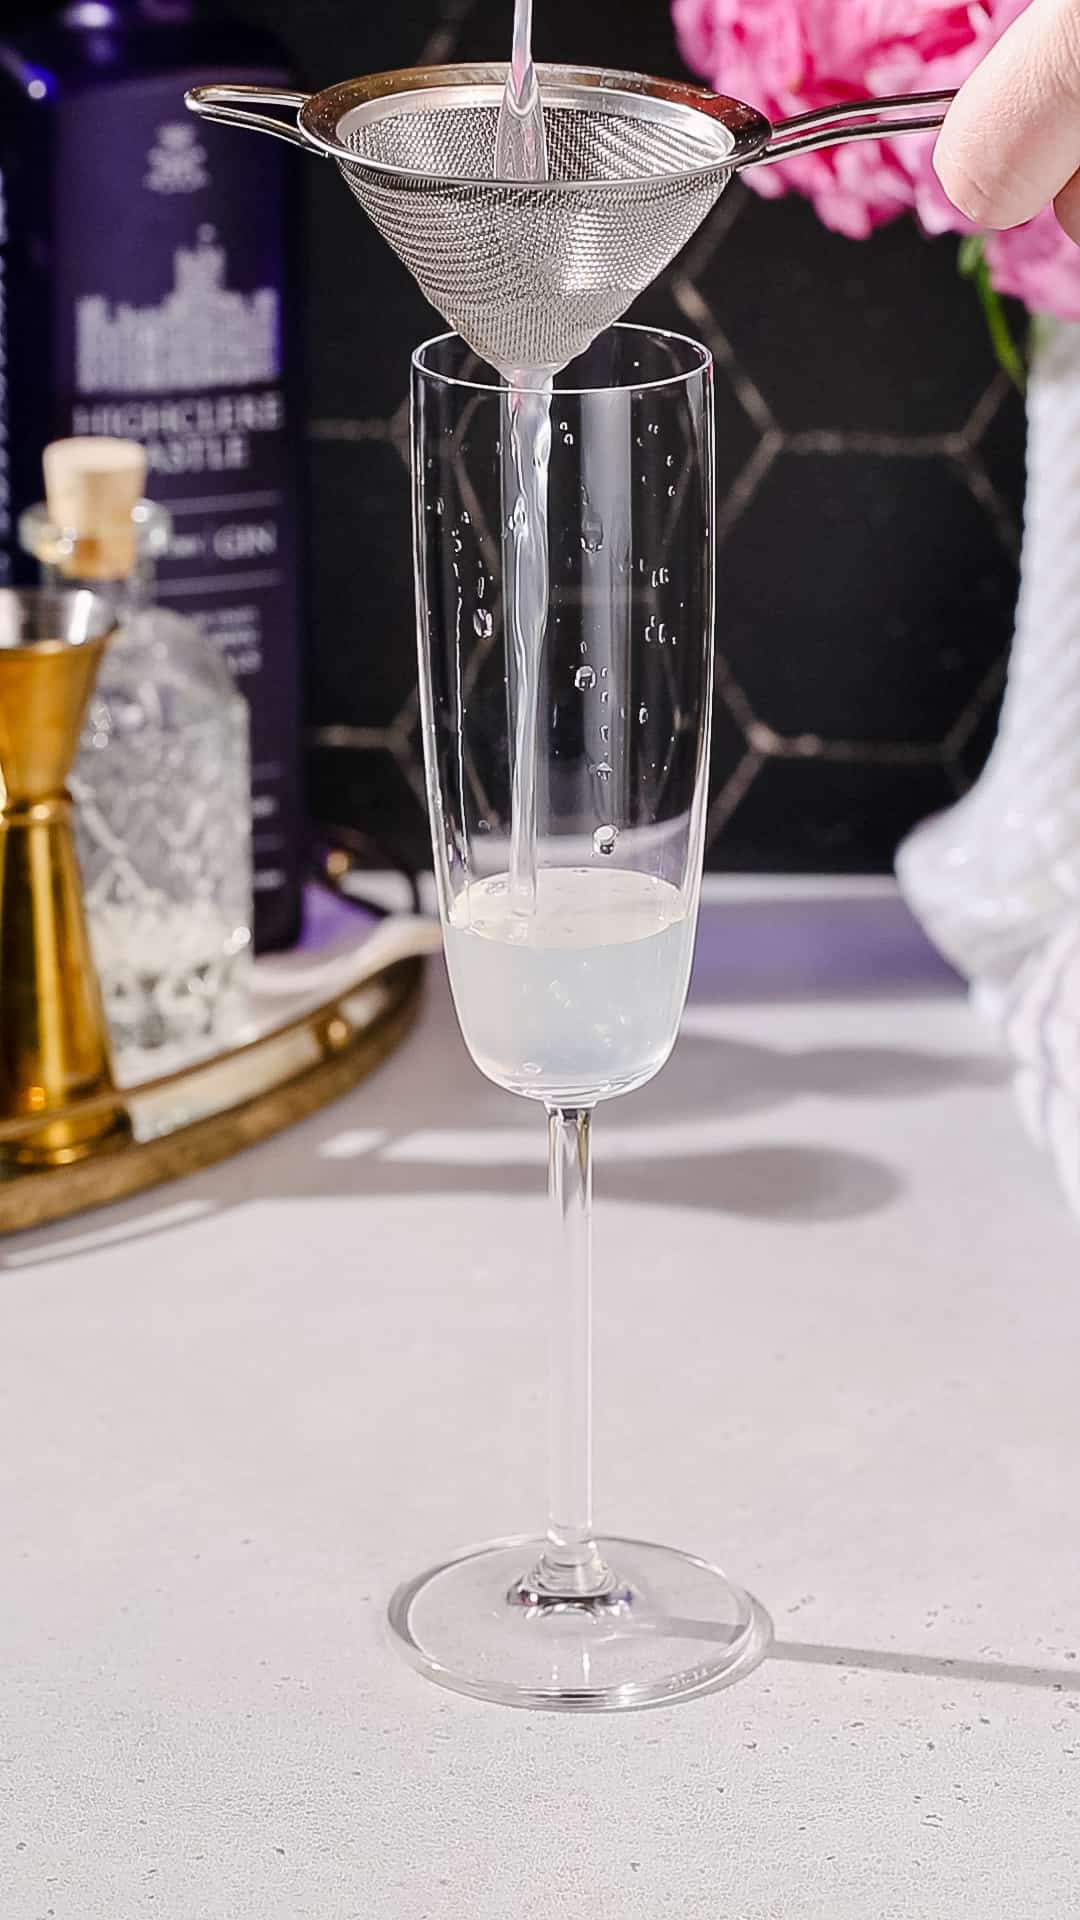 Hand pouring a cocktail into a champagne flute using a fine strainer.